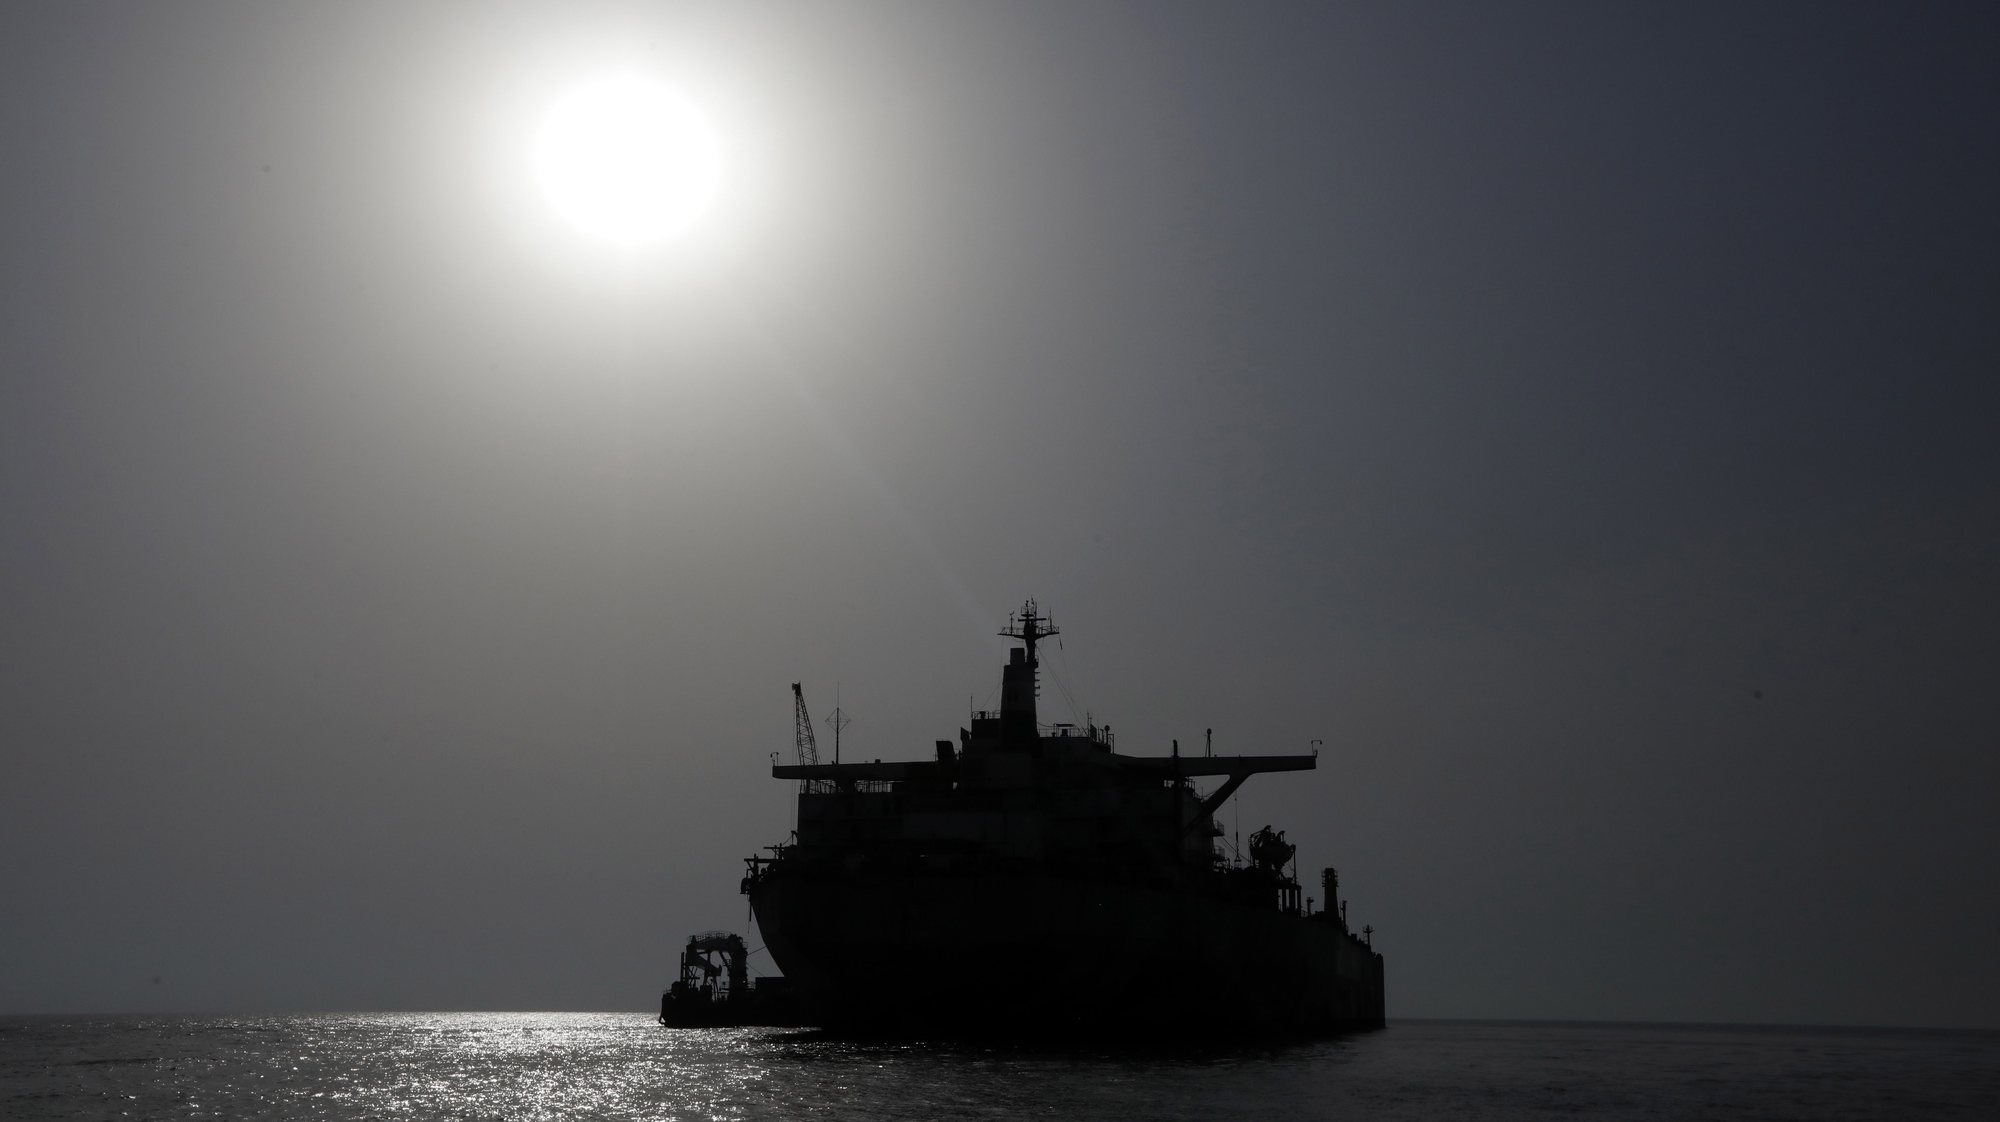 epa10748641 A view shows FSO Safer oil tanker moored in the Red Sea, off the coast of the western Hodeidah province, Yemen, 15 July 2023. The transfer of 1.14 million barrels of oil from the 47-year-old FSO Safer supertanker, stranded off Yemen&#039;s Red Sea coast since 1988, will begin next week after the UN-purchased vessel sailed from Djibouti en route to the Safer site, the United Nations has reported. The Nautica is a super-tanker the UN purchased for taking the crude oil from the decaying FSO Safer. The beleaguered FSO Safer has not undergone maintenance since Yemen&#039;s war broke out in 2015 and was left abandoned off the Houthis-held port of Hodeidah in the Red Sea, posing a serious risk to the environment off the coast of Yemen due to the possibility of it breaking up or catching fire.  EPA/YAHYA ARHAB